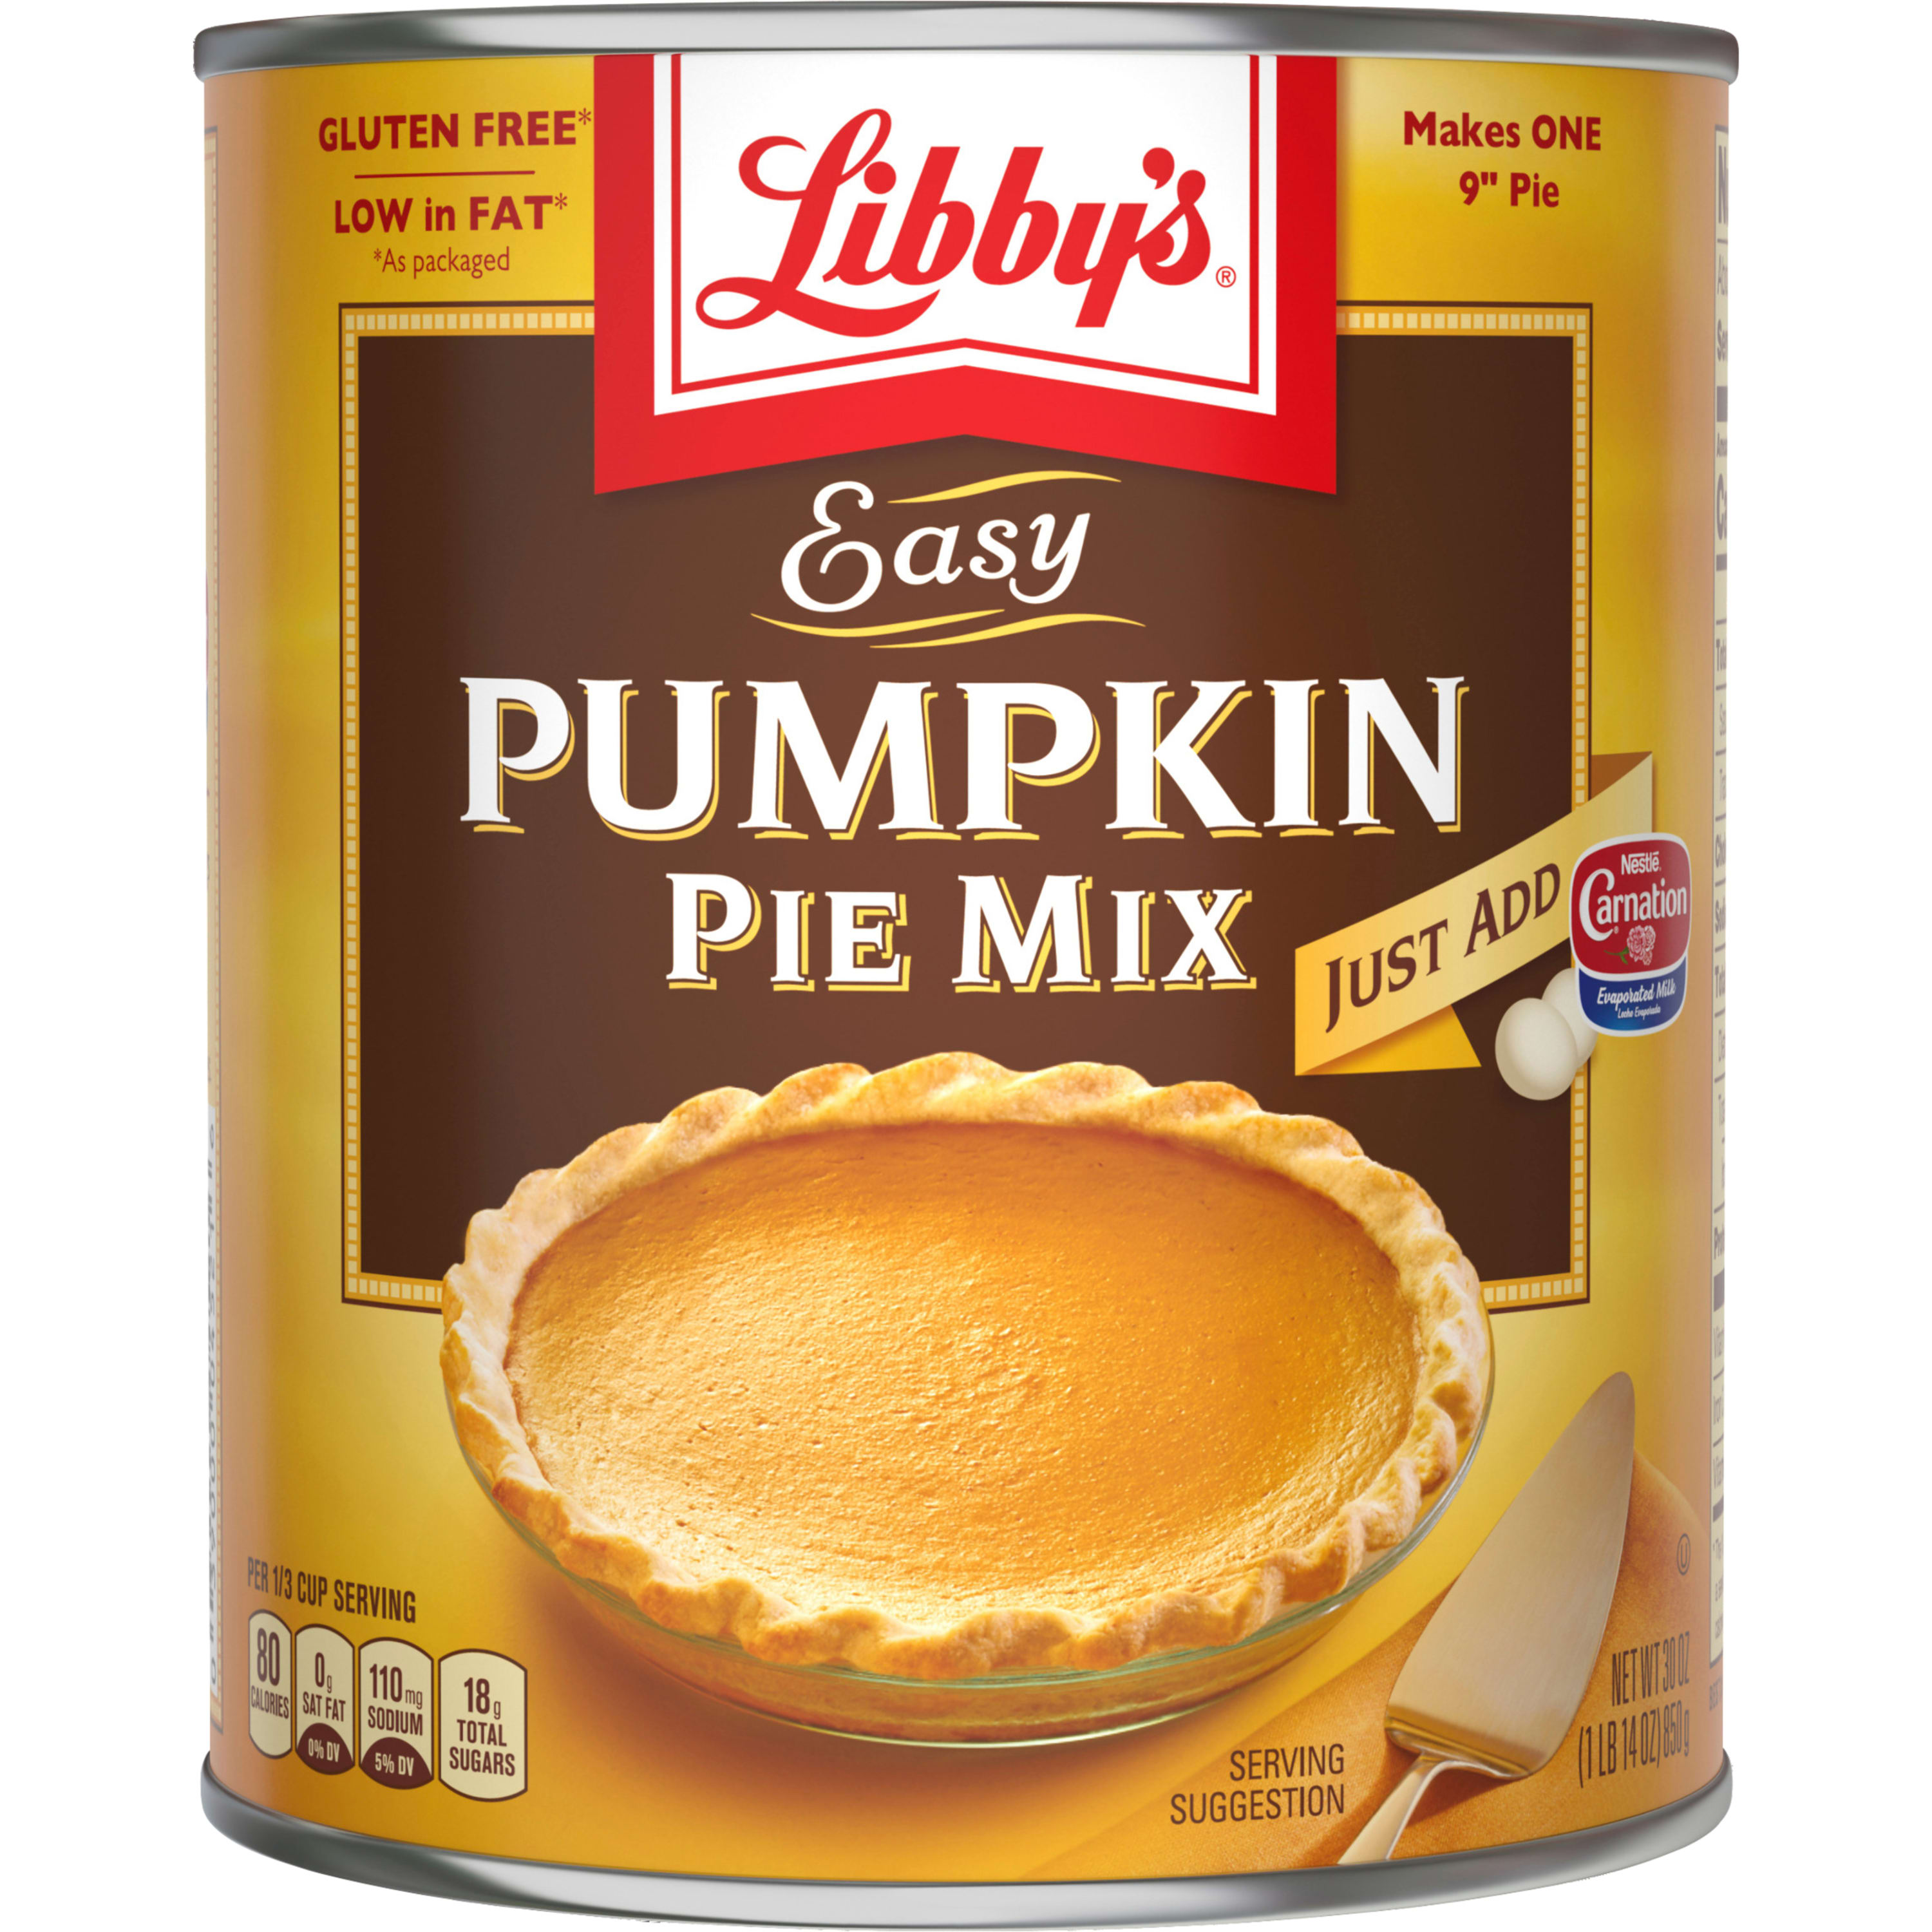 Libby's Easy Pumpkin Pie Mix, All-Natural, No Preservatives, 30 oz Cans - image 1 of 10